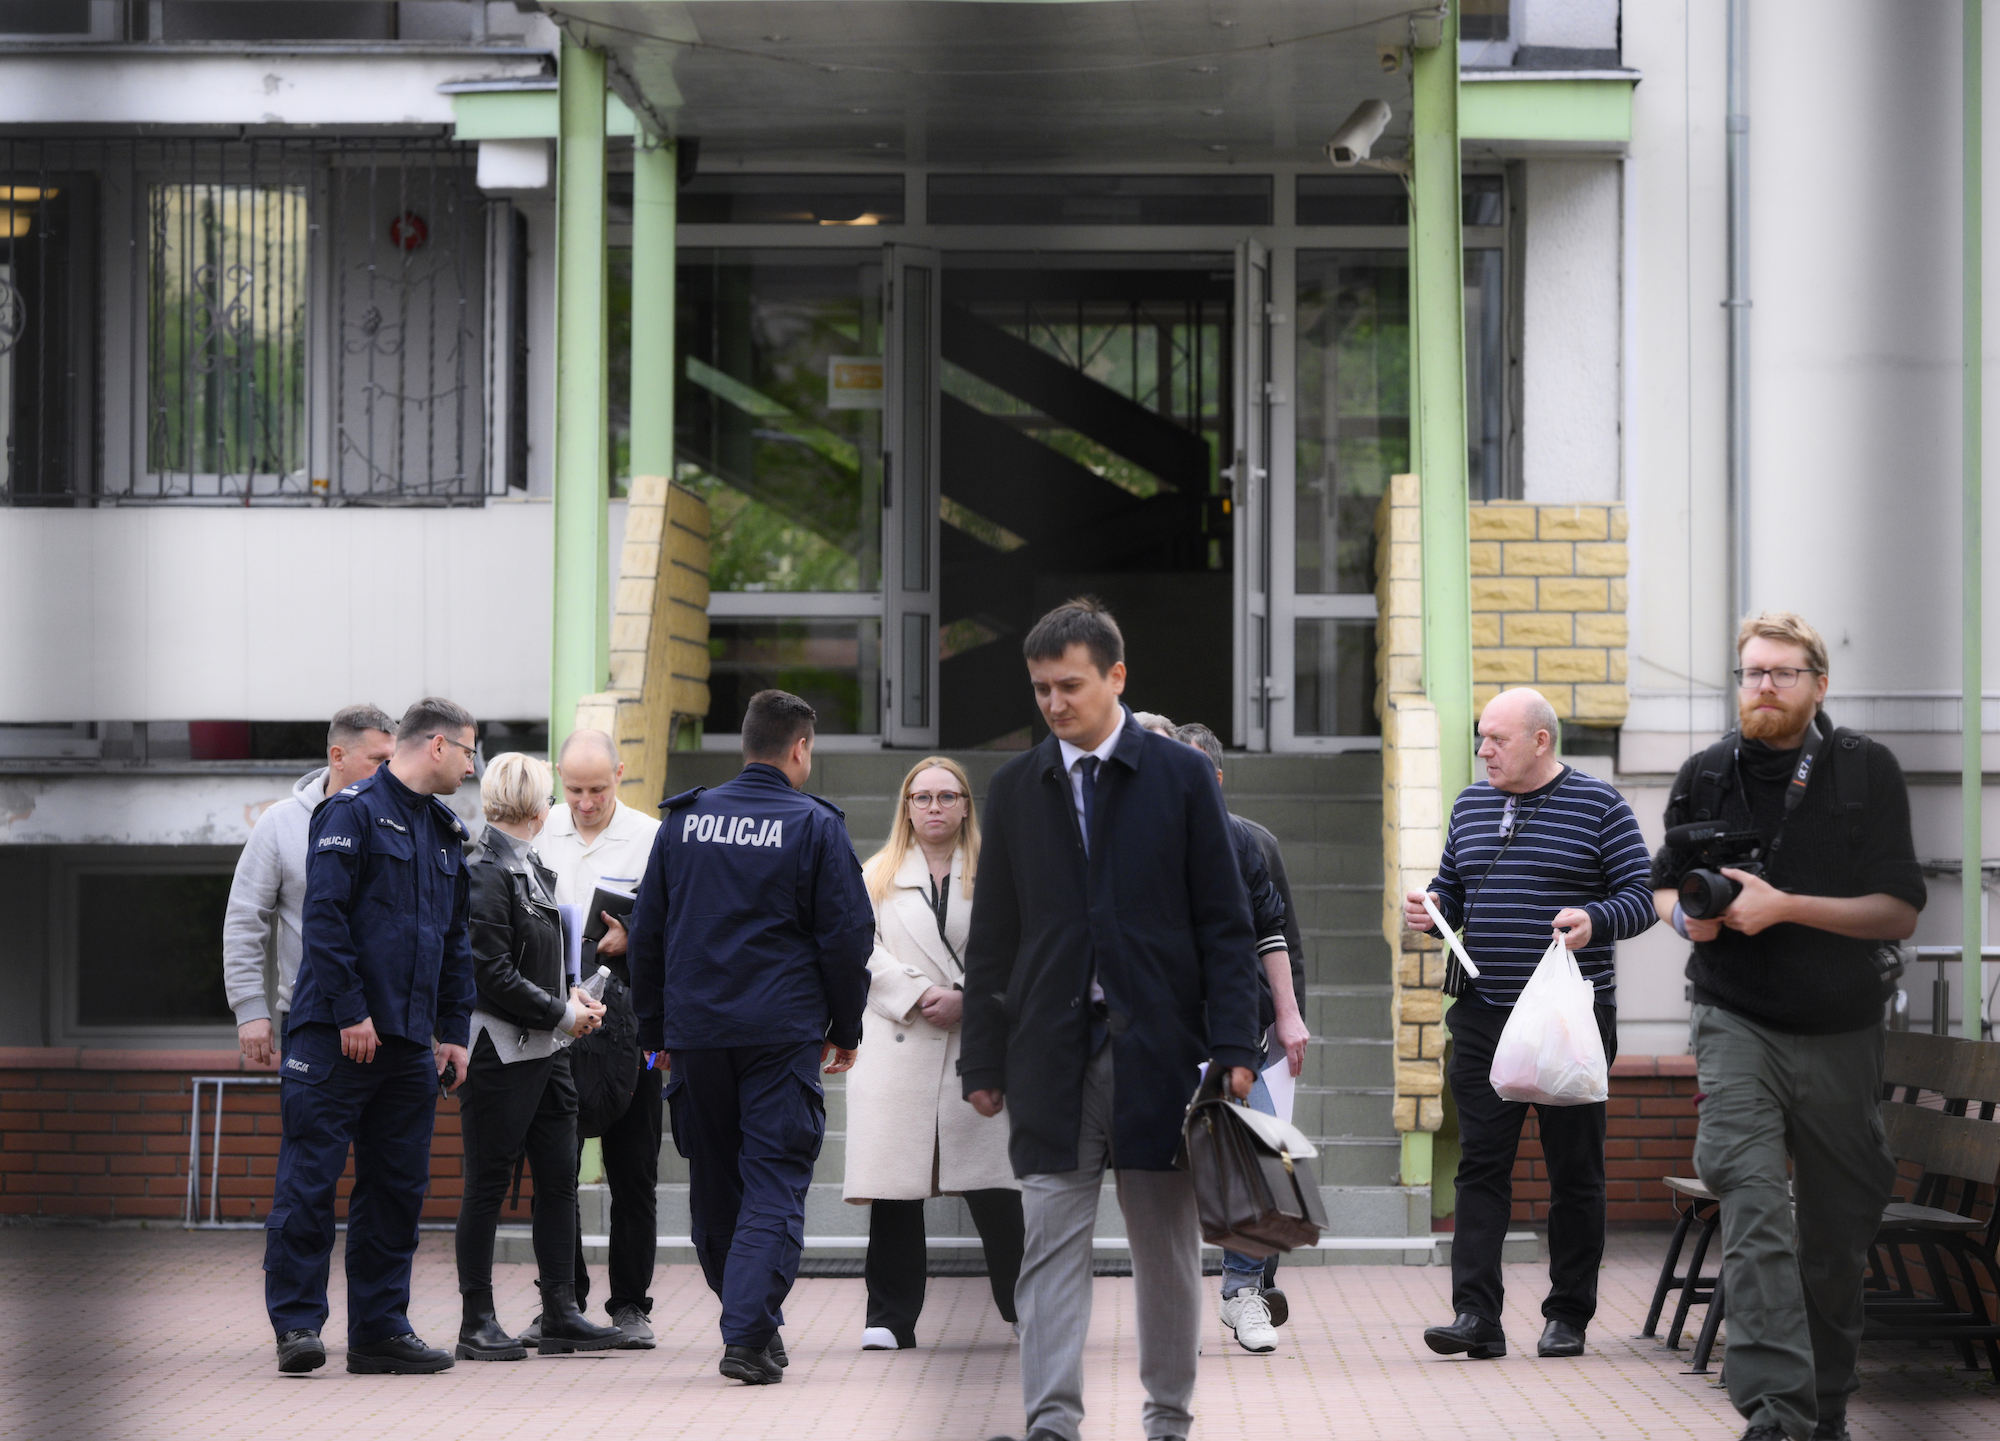 Police and city authorities are seen at the Russian embassy school in Warsaw on Saturday.